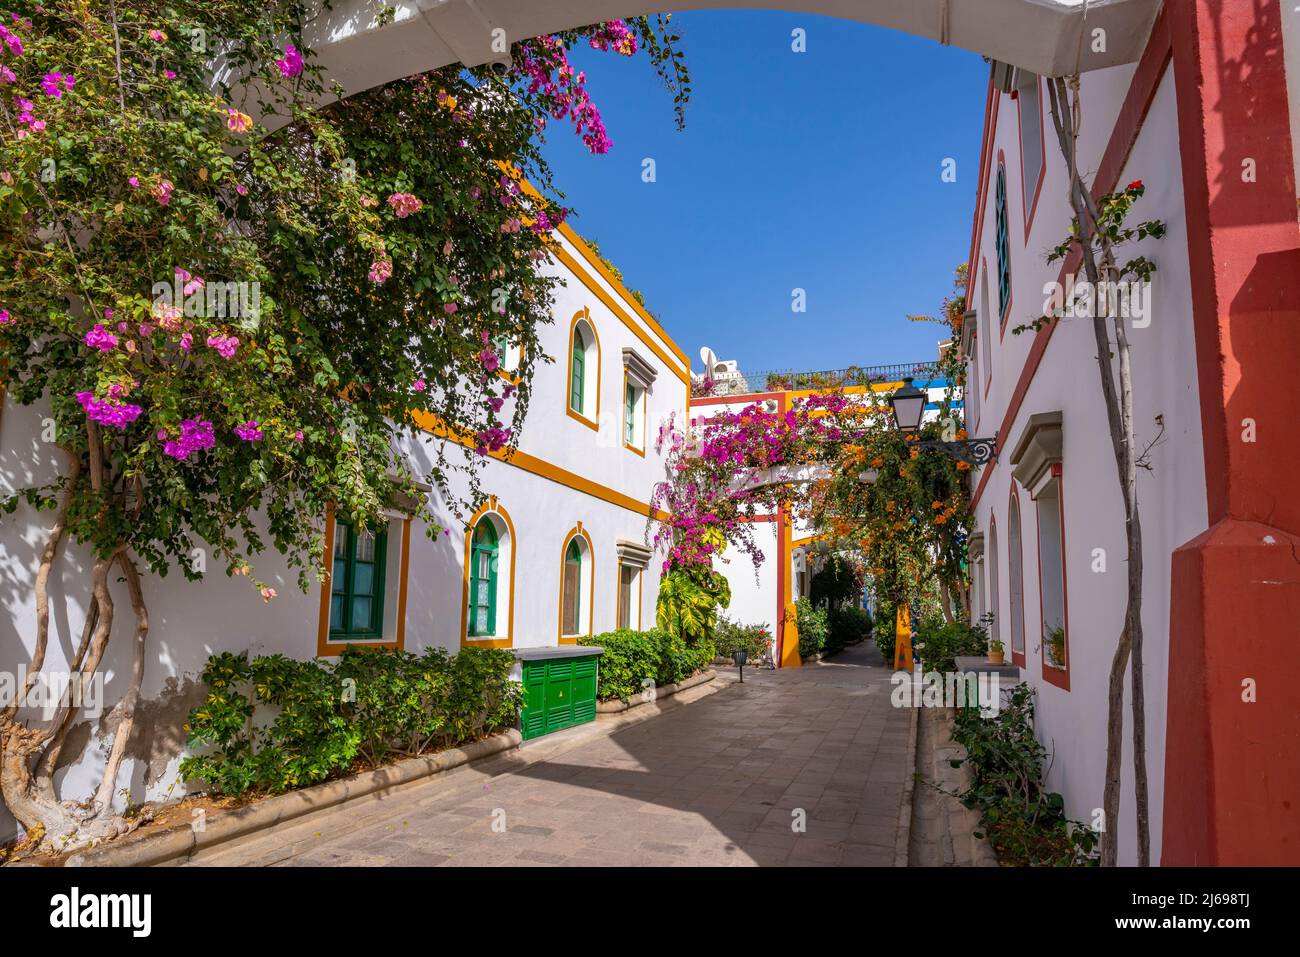 View of colourful buildings and flowers in the old town, Puerto de Mogan, Gran Canaria, Canary Islands, Spain, Atlantic, Europe Stock Photo